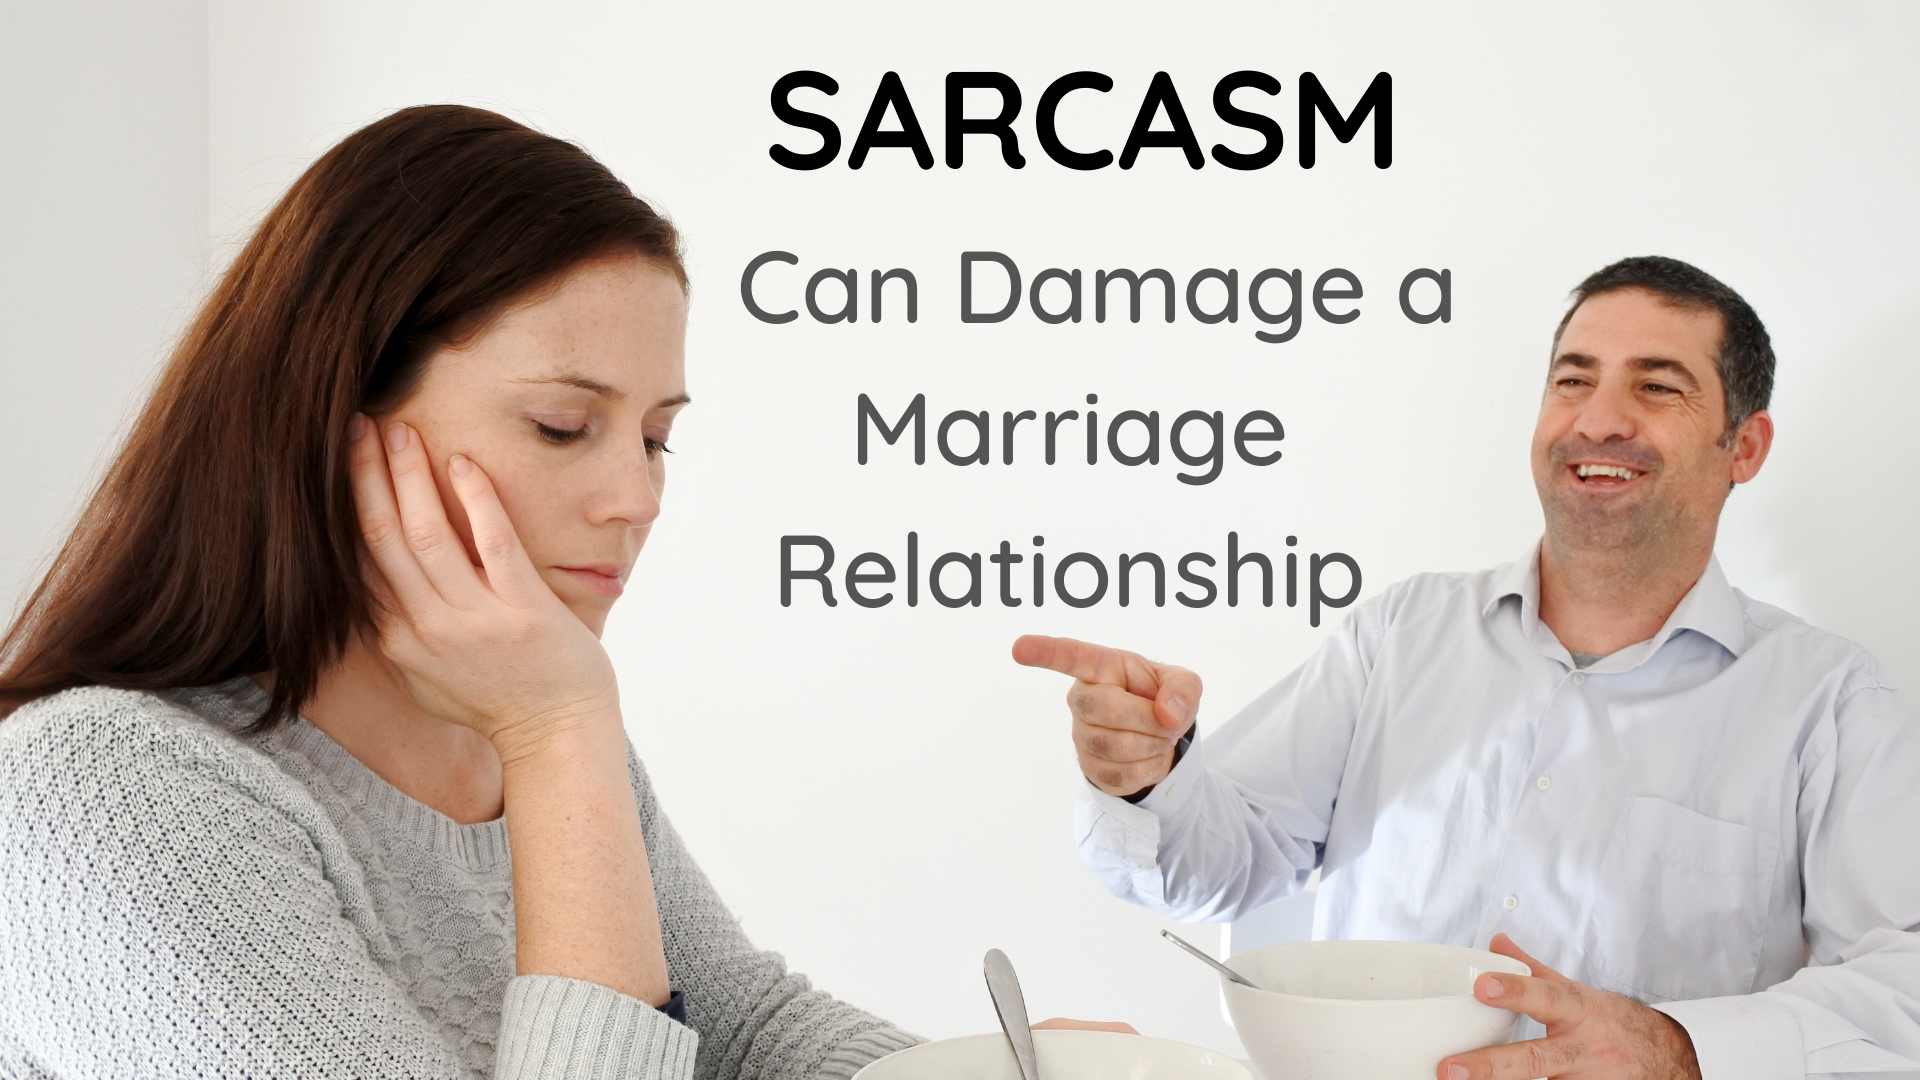 Sarcasm can damage a marriage